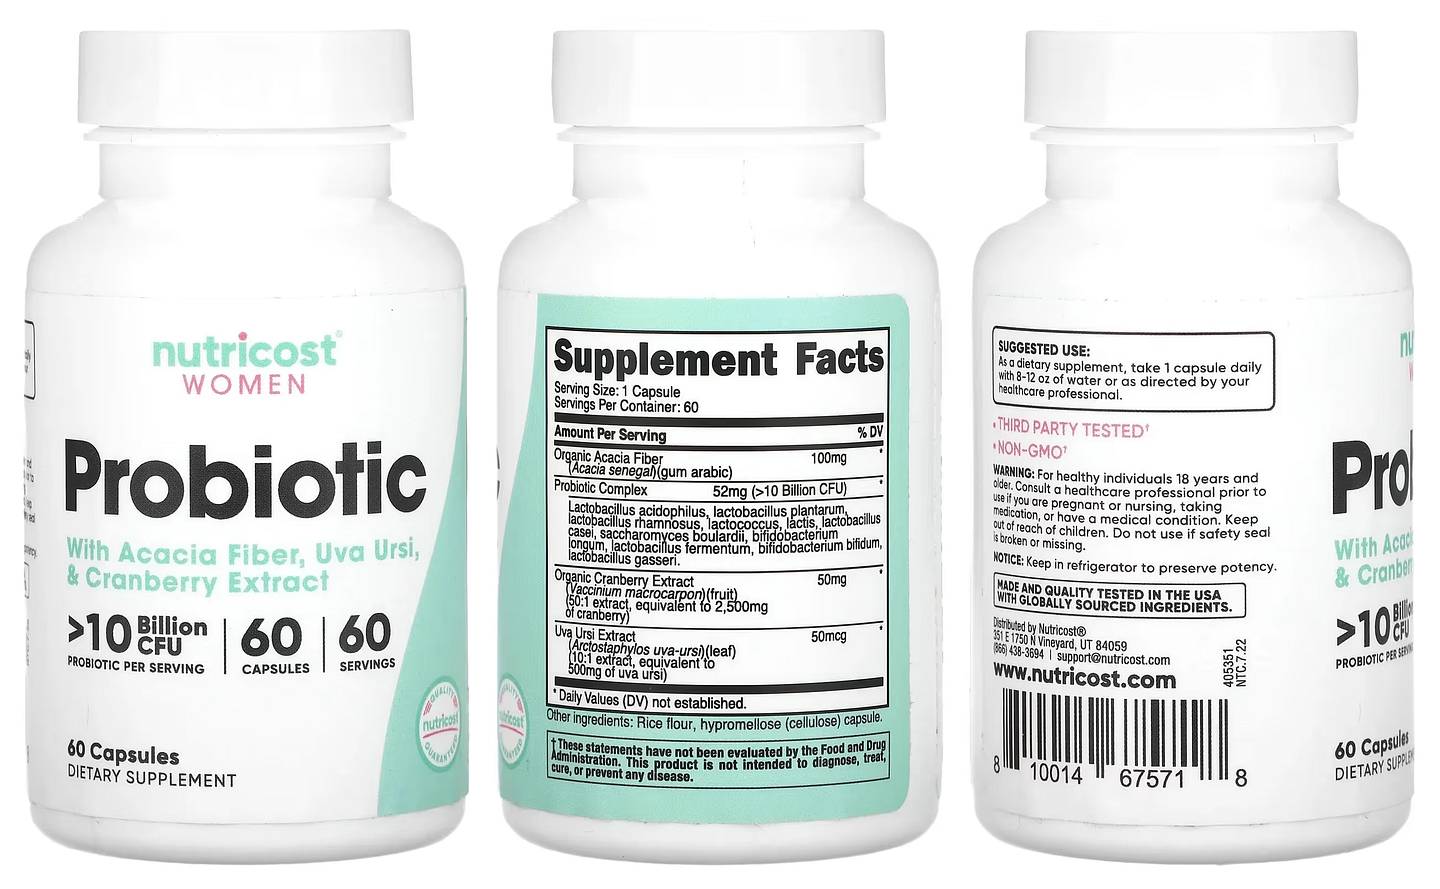 Nutricost, Women Probiotic with Acacia Fiber, Uva Ursi, & Cranberry Extract packaging